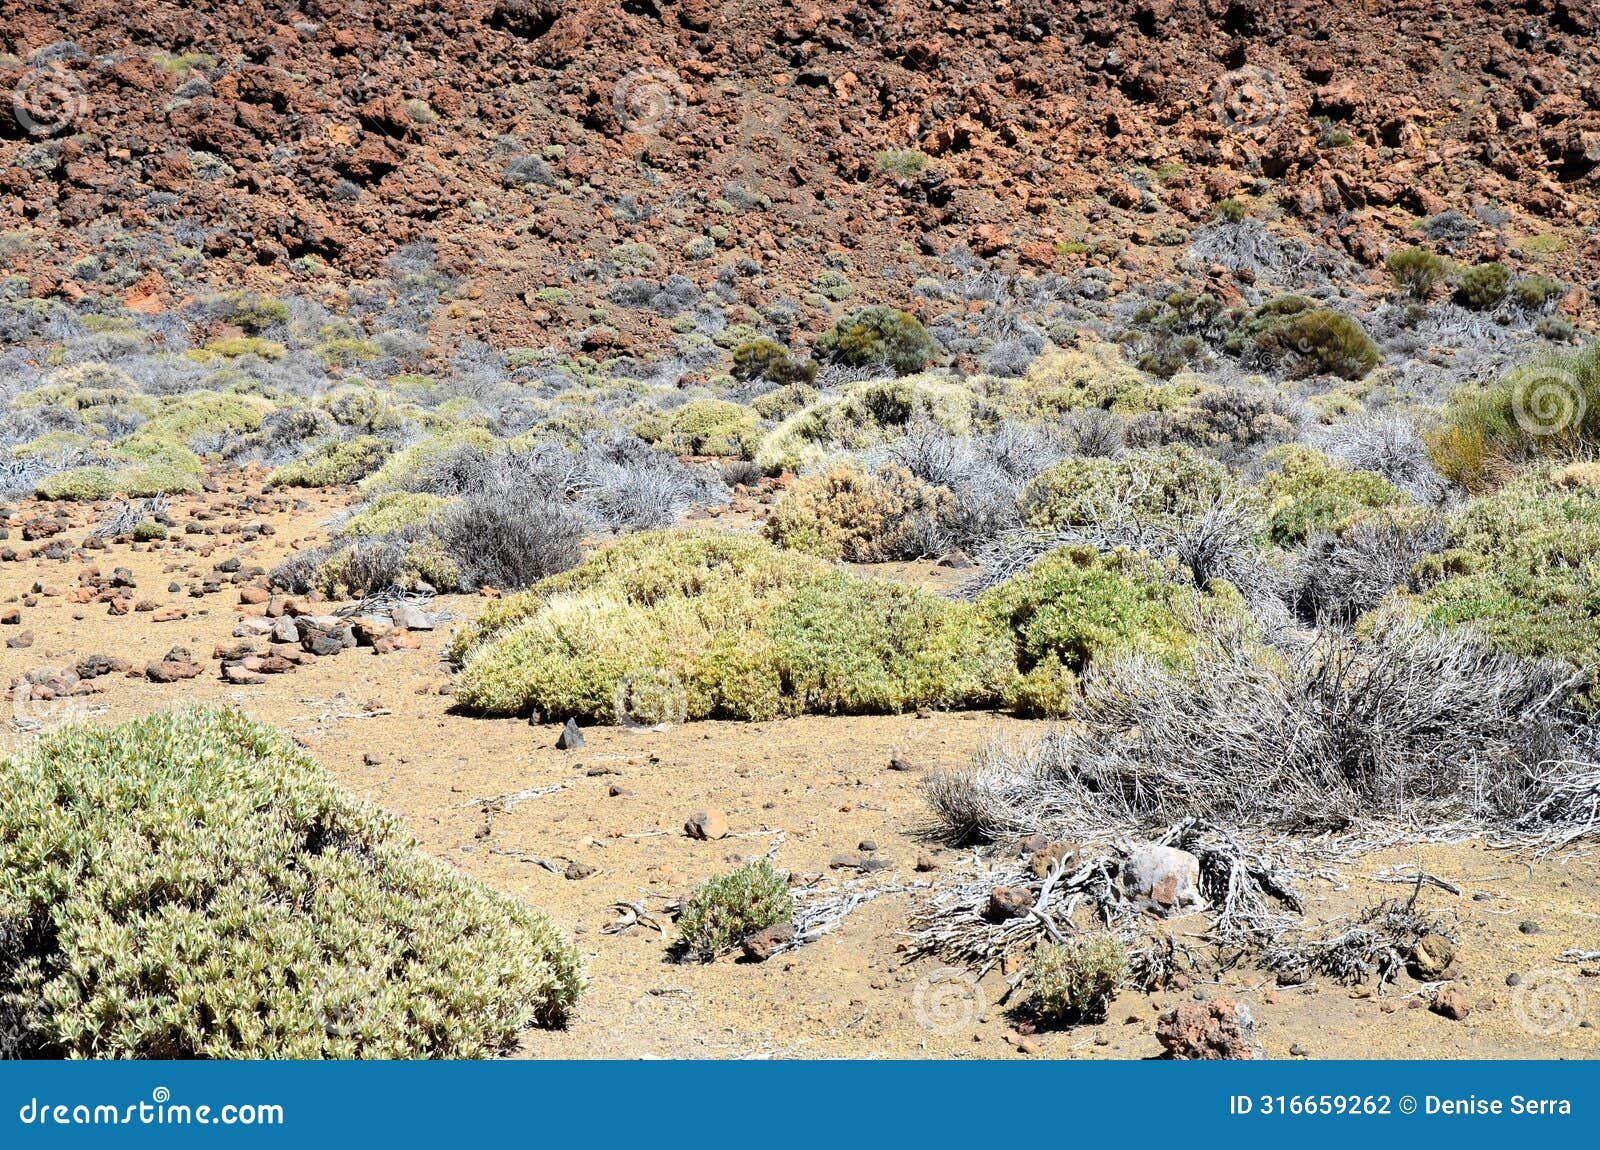 scenic view of volcanic rock formations in desert during sunny day, teide national park, tenerife